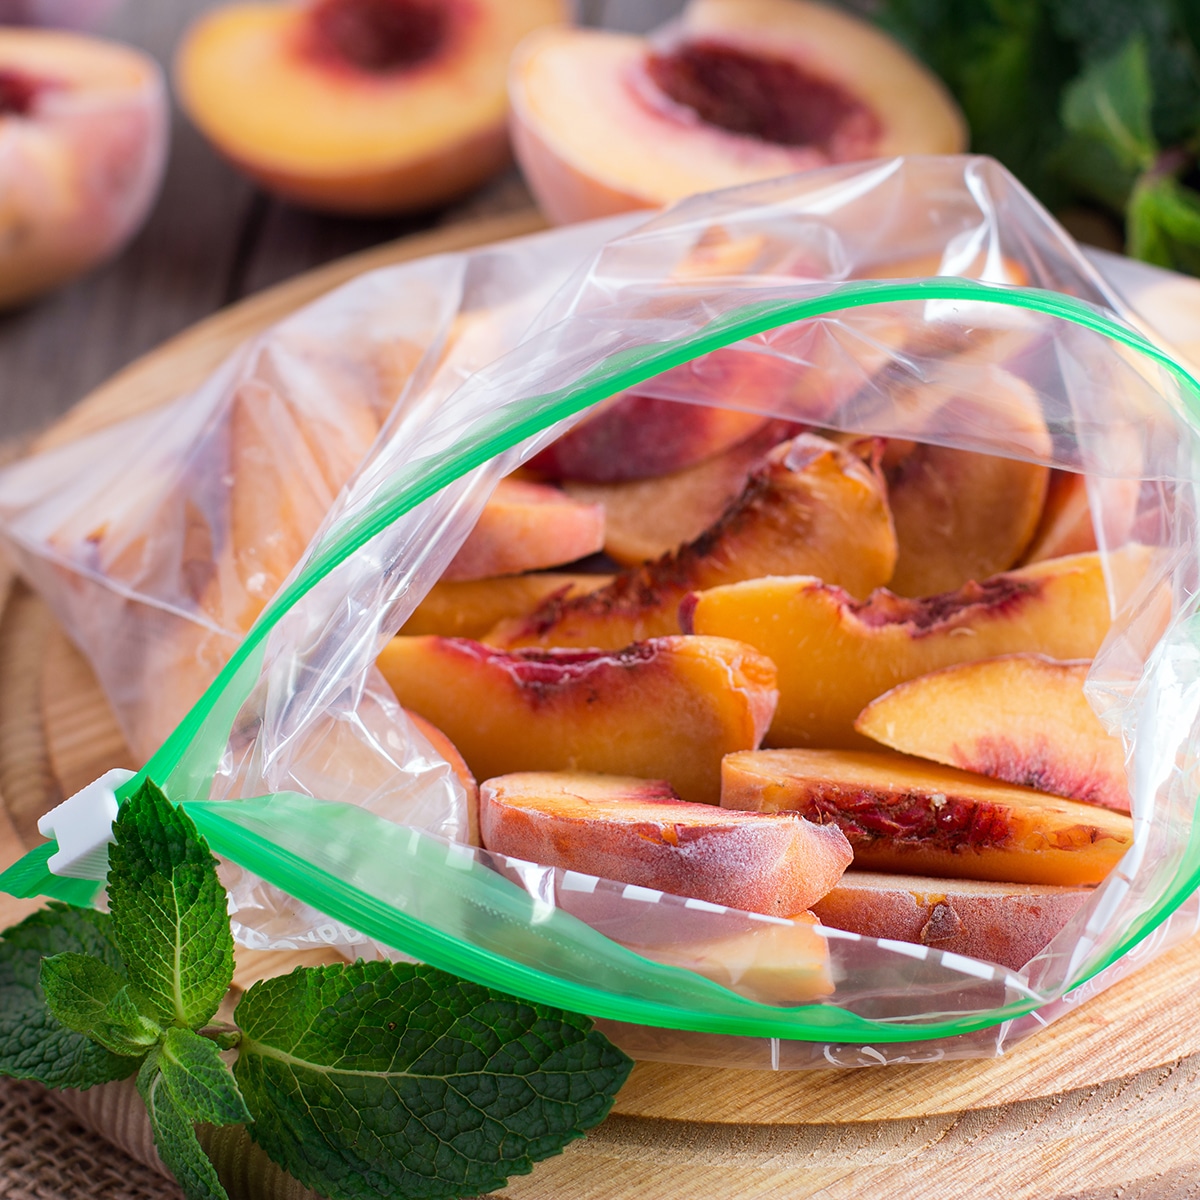 Frozen peach slices with the skin on in a zip-top bag on a table next to frozen peaches that have been cut in half.